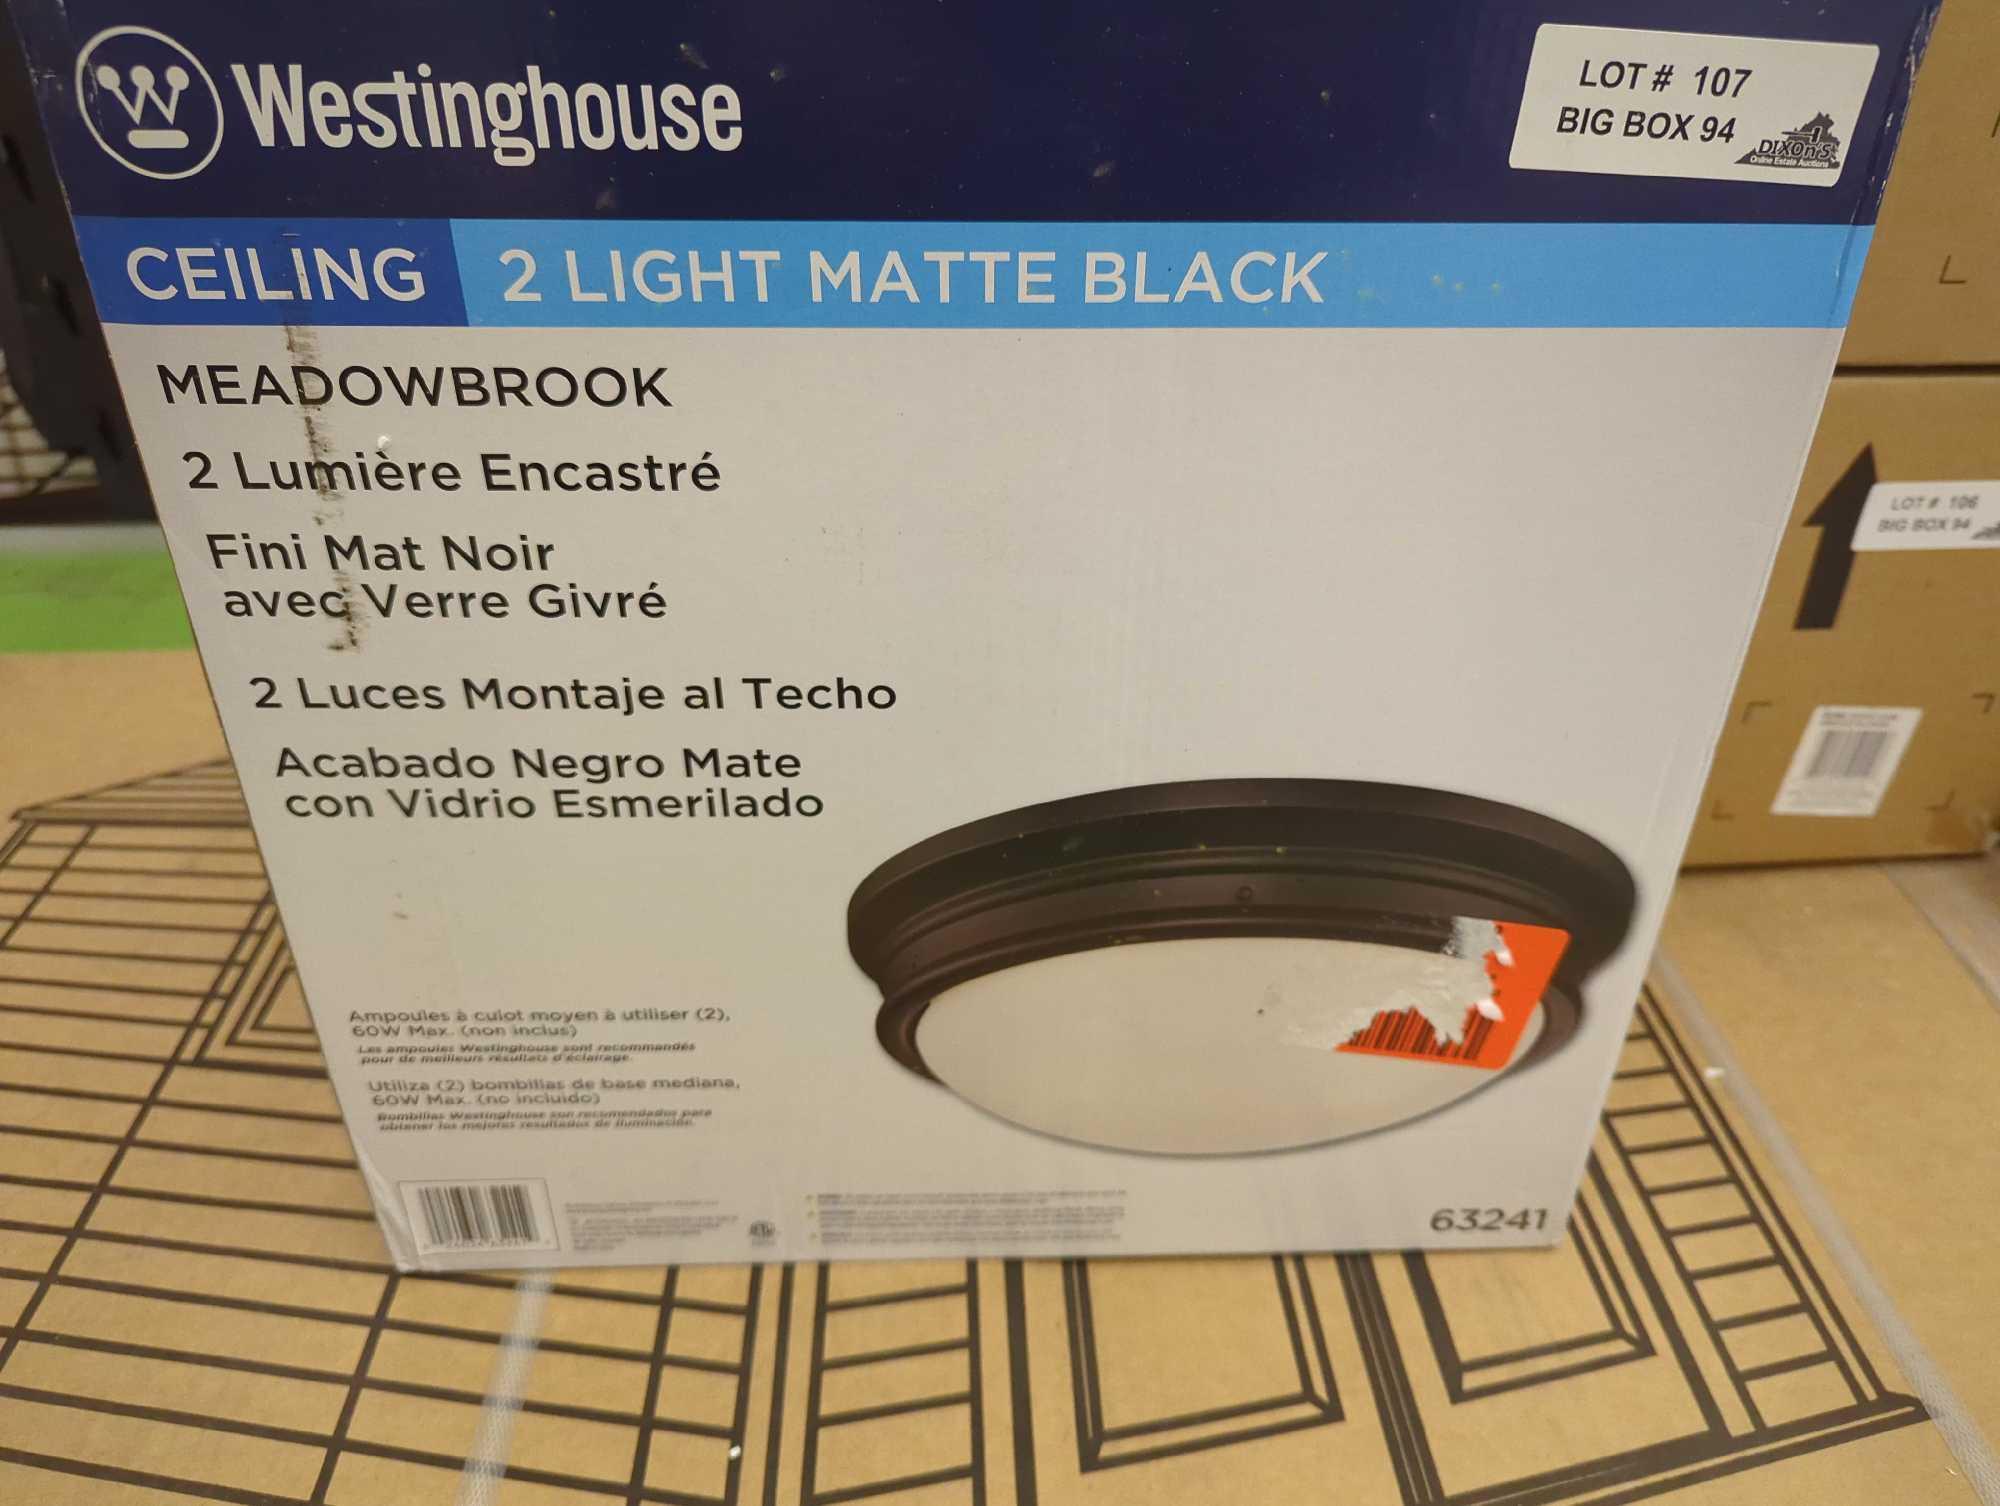 Westinghouse Meadowbrook 2-Light Matte Black Flush Mount, Appears to be New in Factory Sealed Box